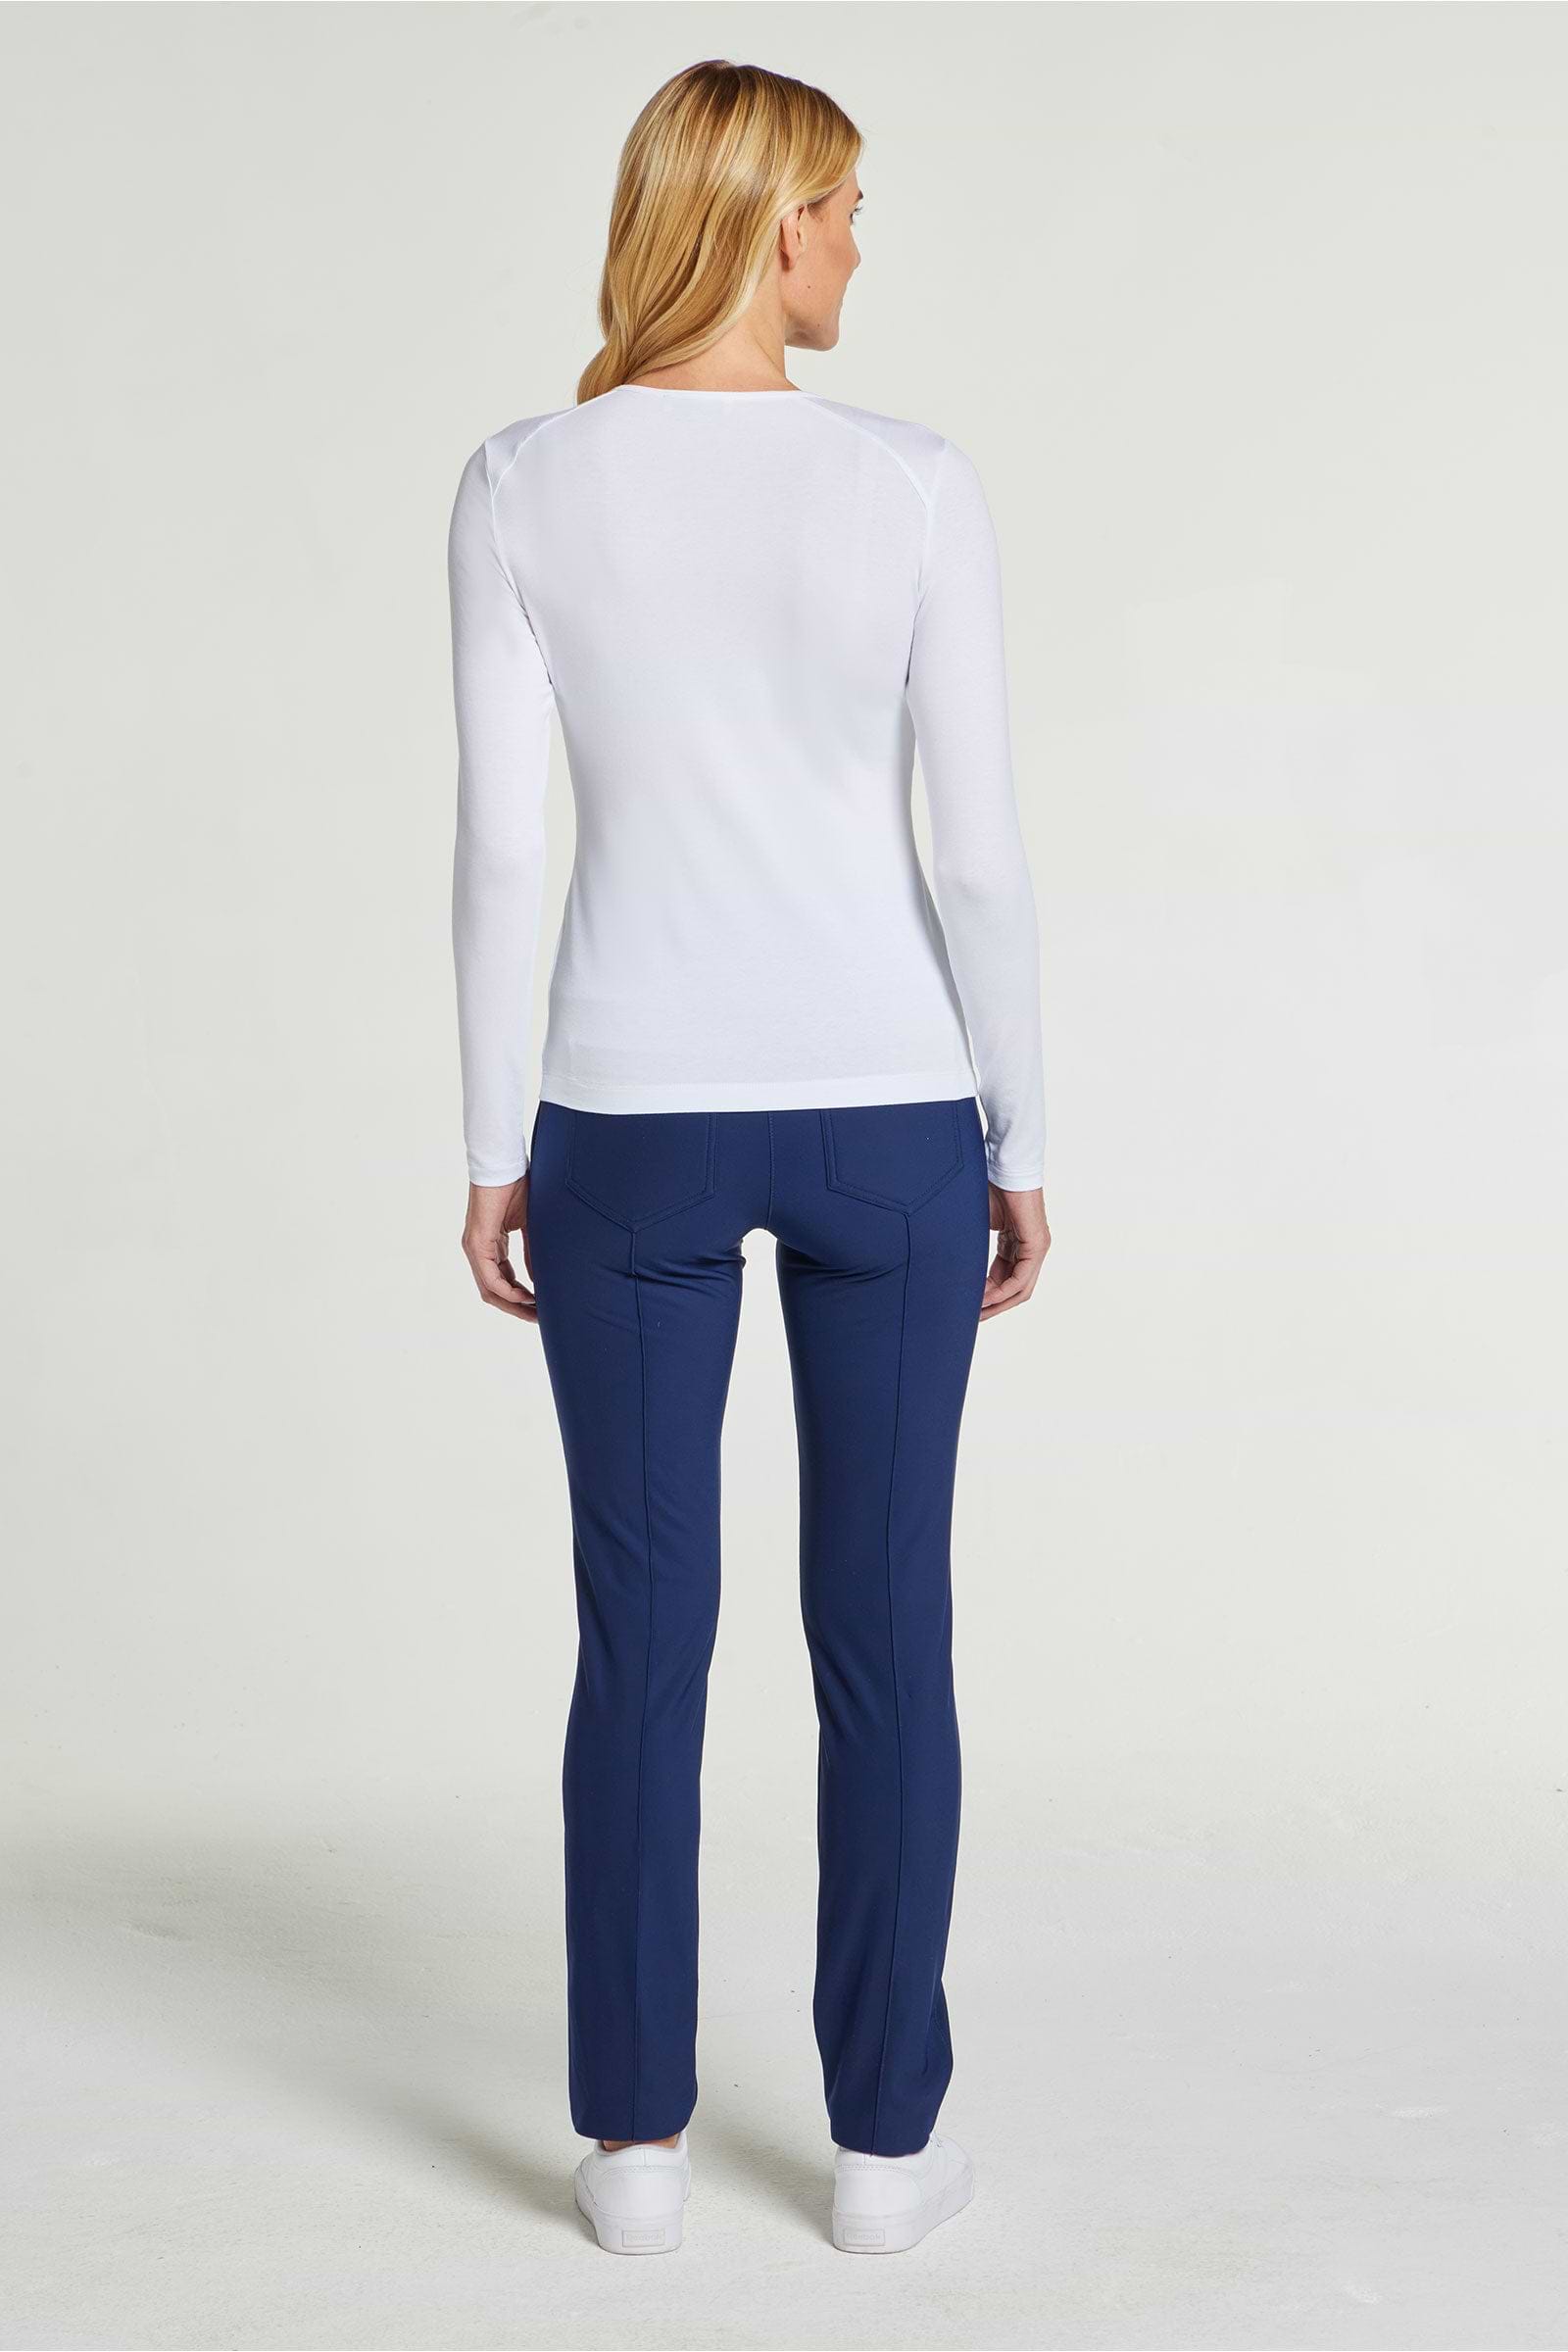 The Best Travel Top. Woman Showing the Back Profile of a Tony Pima Cotton Long-Sleeve Top in White